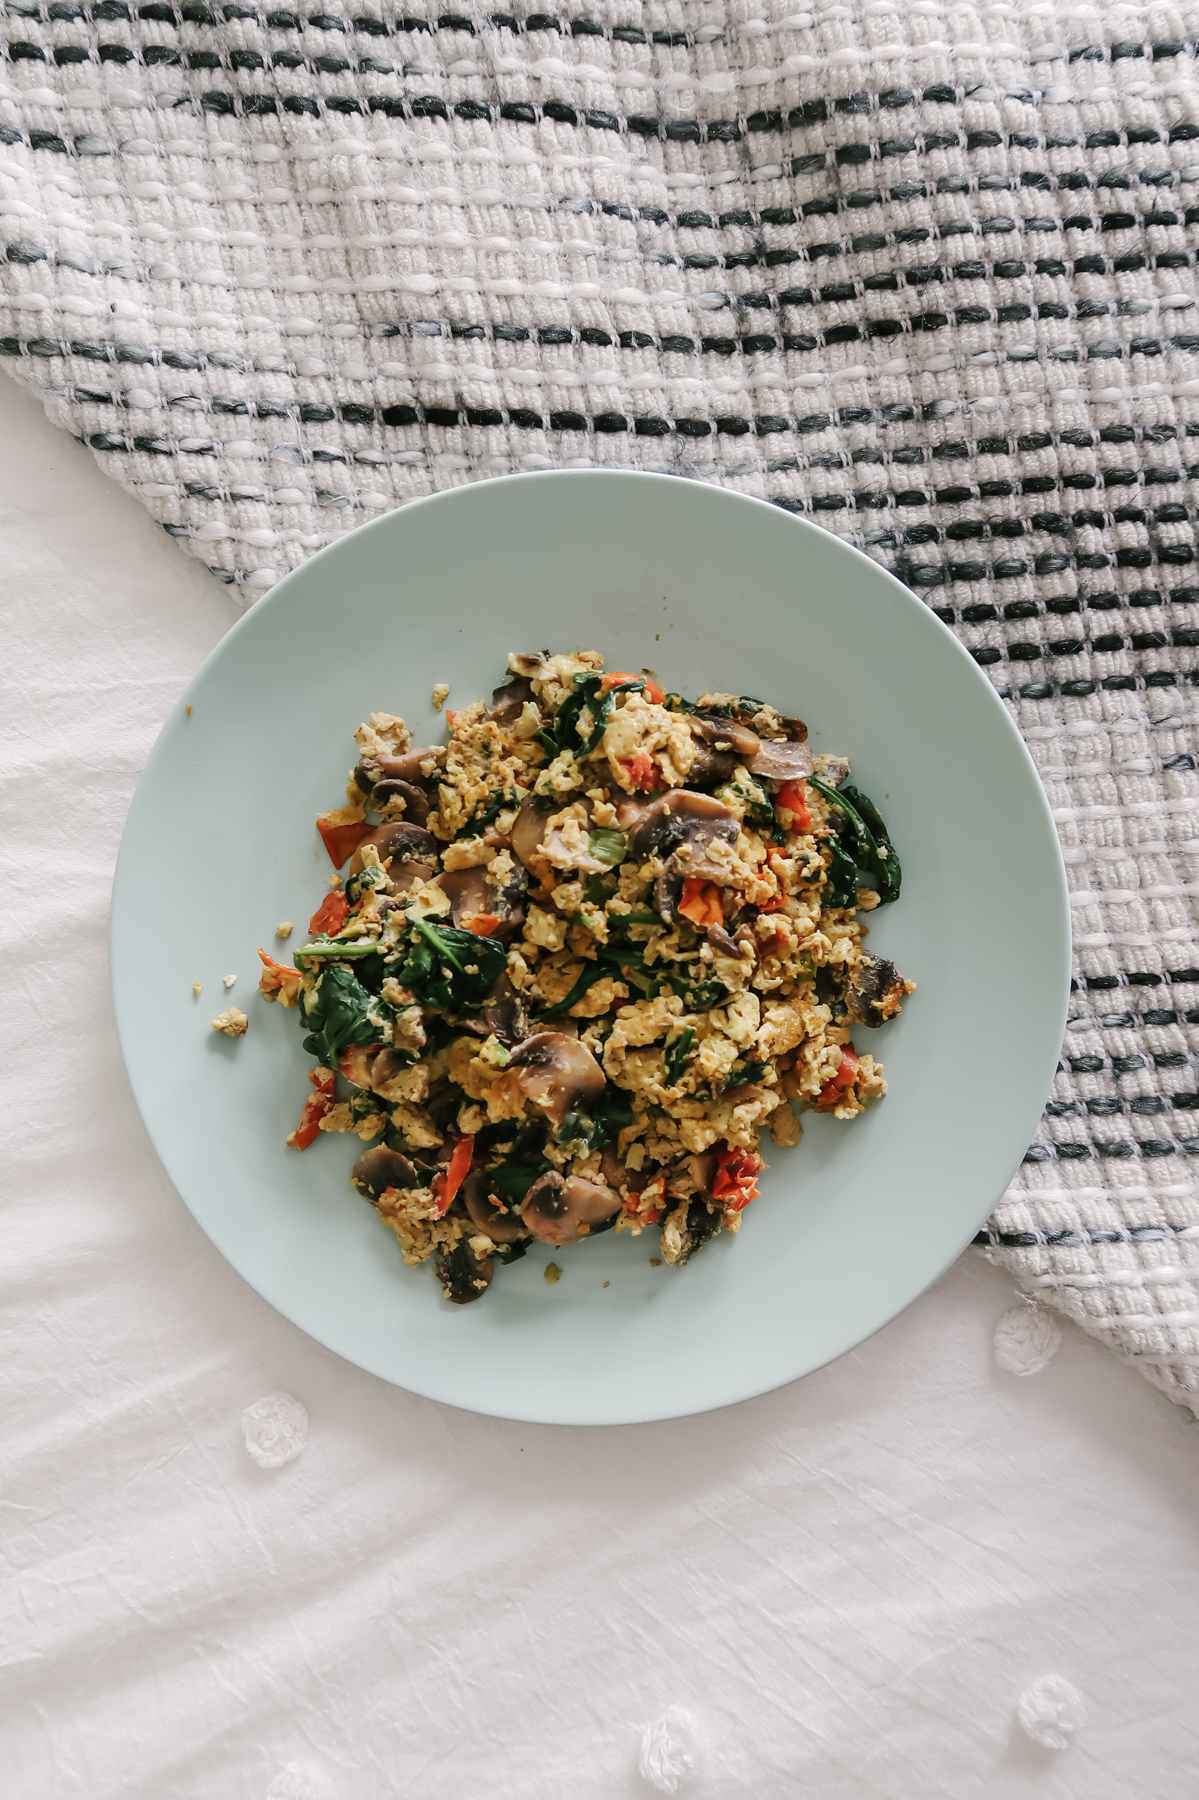 egg scramble with mushrooms, spinach, and tomatoes gabby in the city quarantine 2020